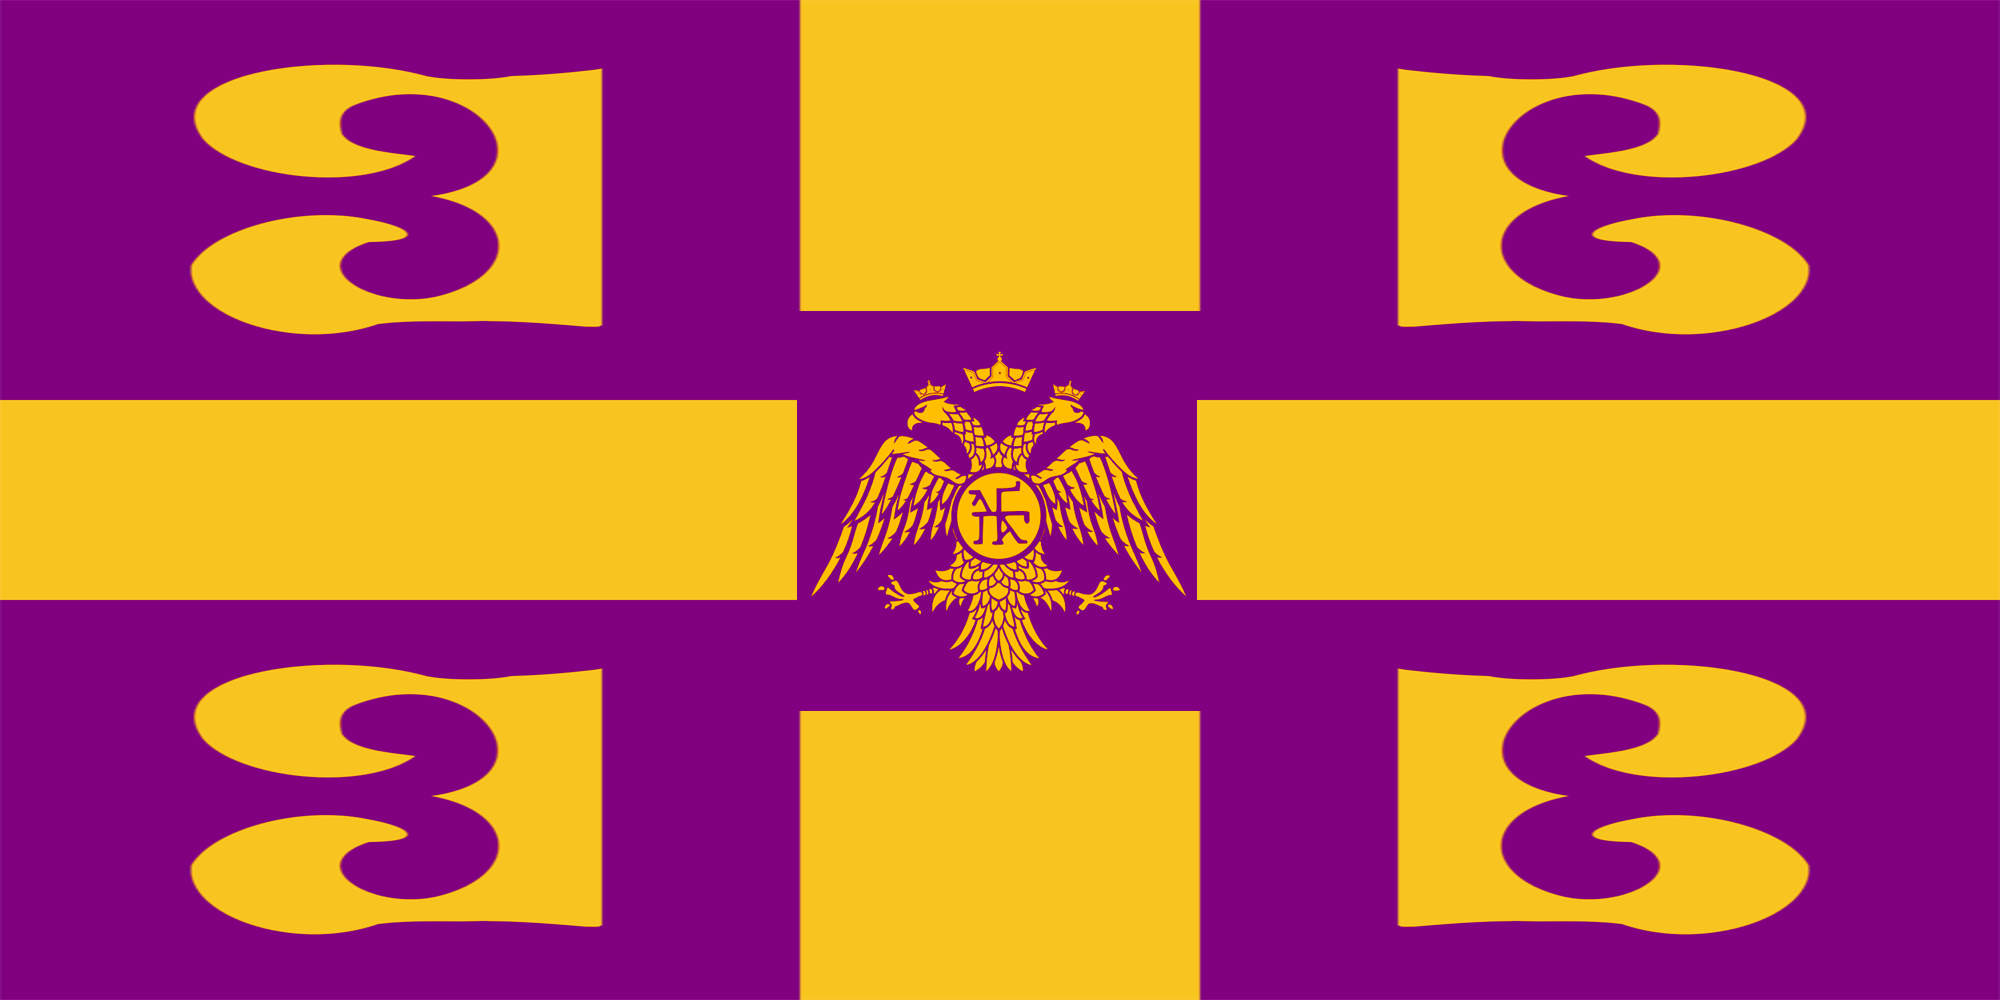 New_Flag_of_the_Byzantine_Empire_Galaguerra1_first_version.png